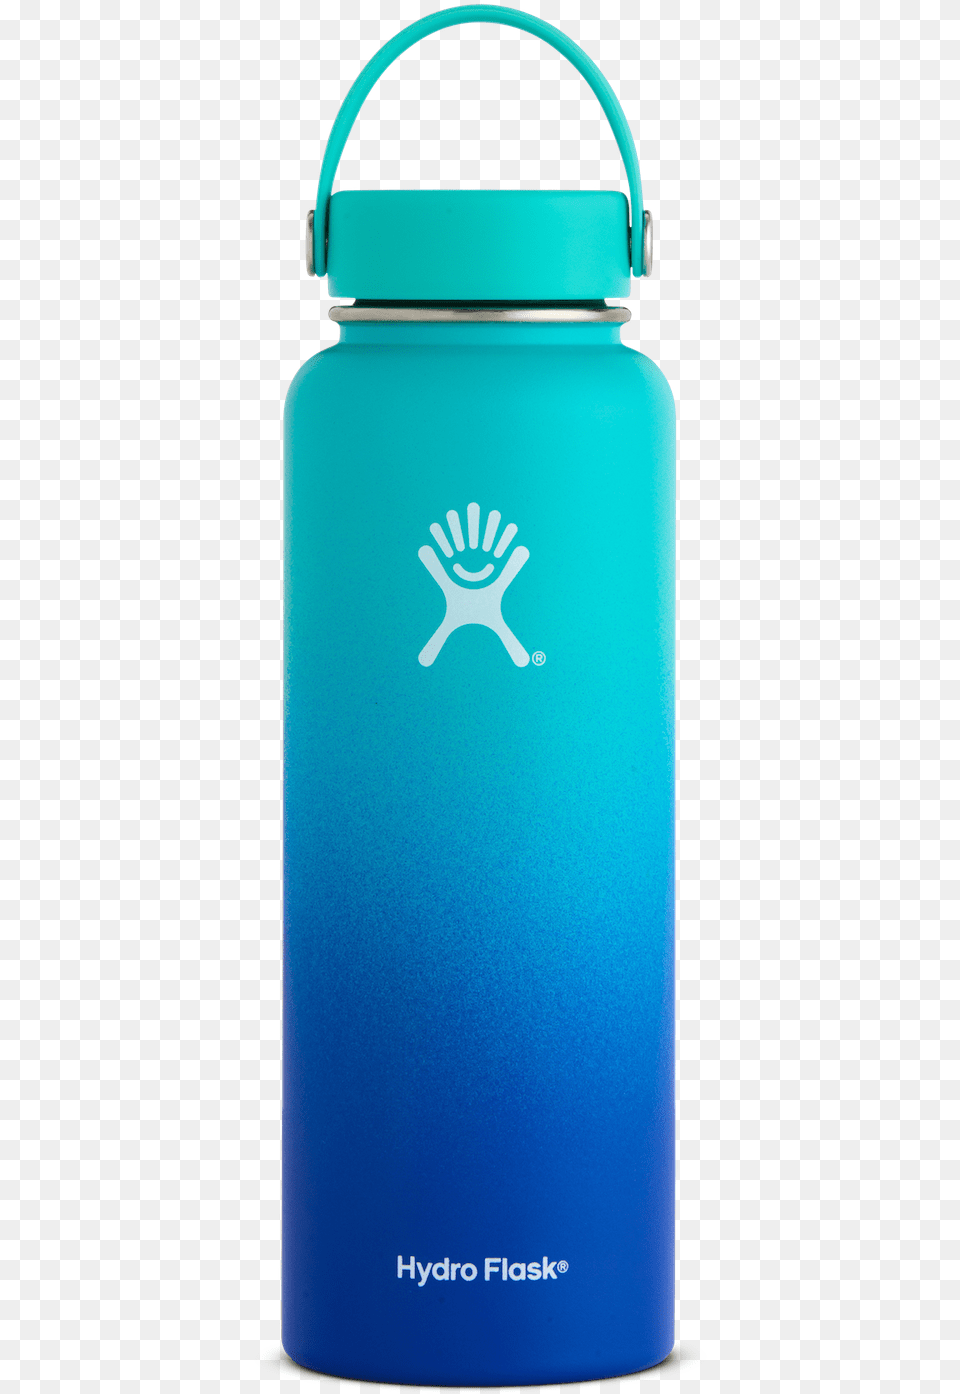 Hydro Flask Hydroflask Hawaii Collection Hydro Flask Hydro Flask Blue Ombre, Bottle, Water Bottle, Alcohol, Beer Png